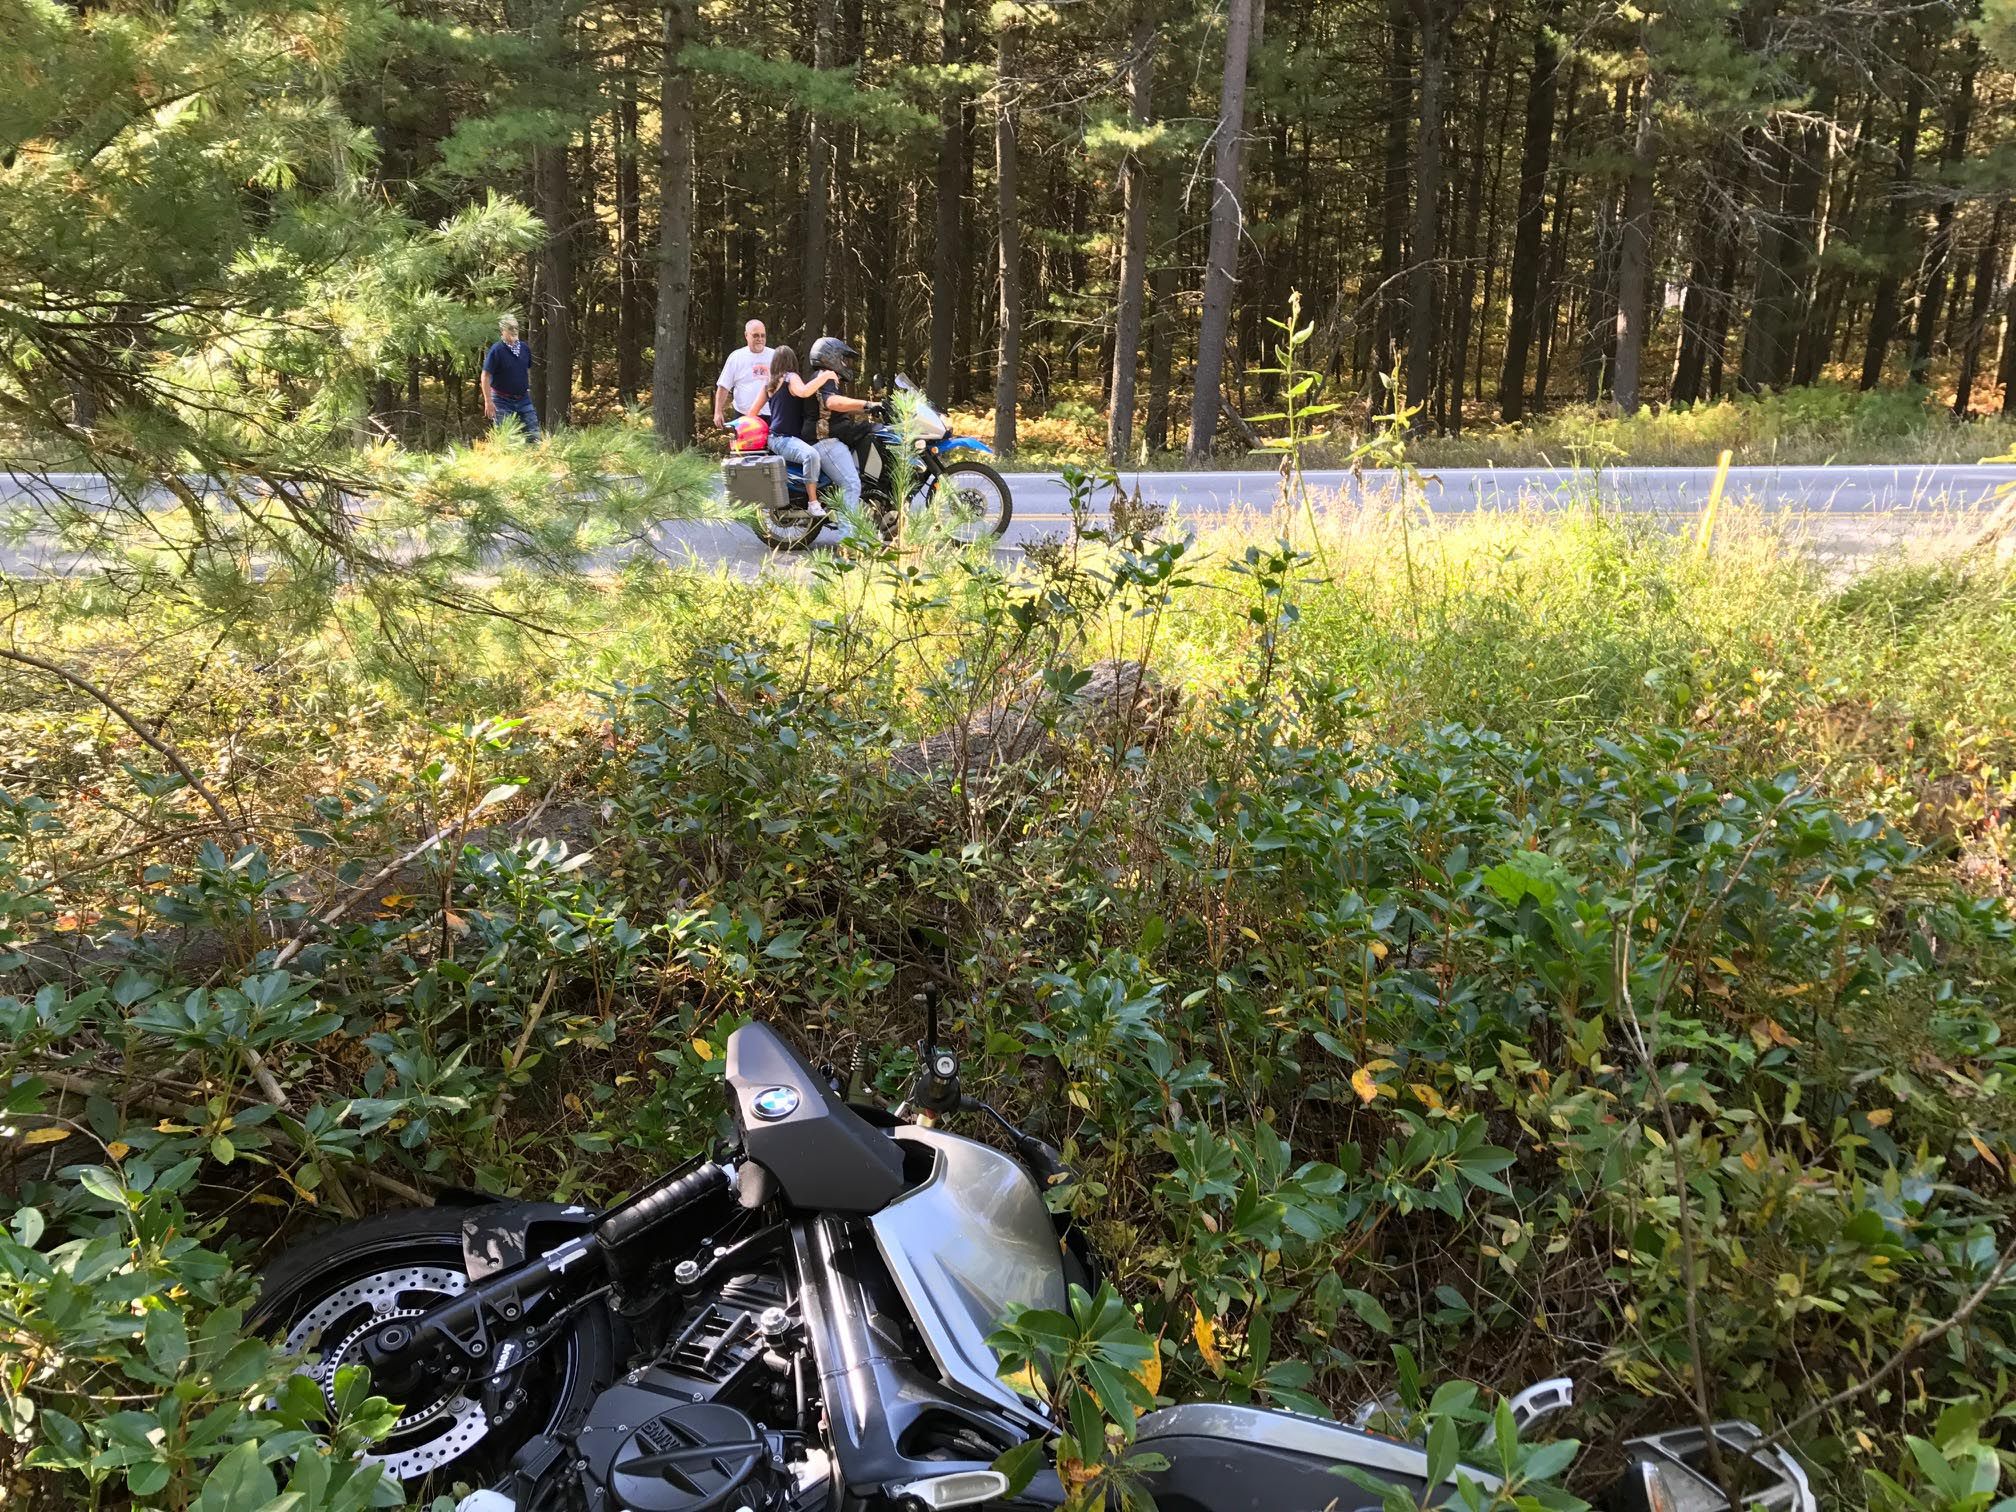 Bikers stopped to help, ironically the pilion was not wearing a helmet to "dry her hair"